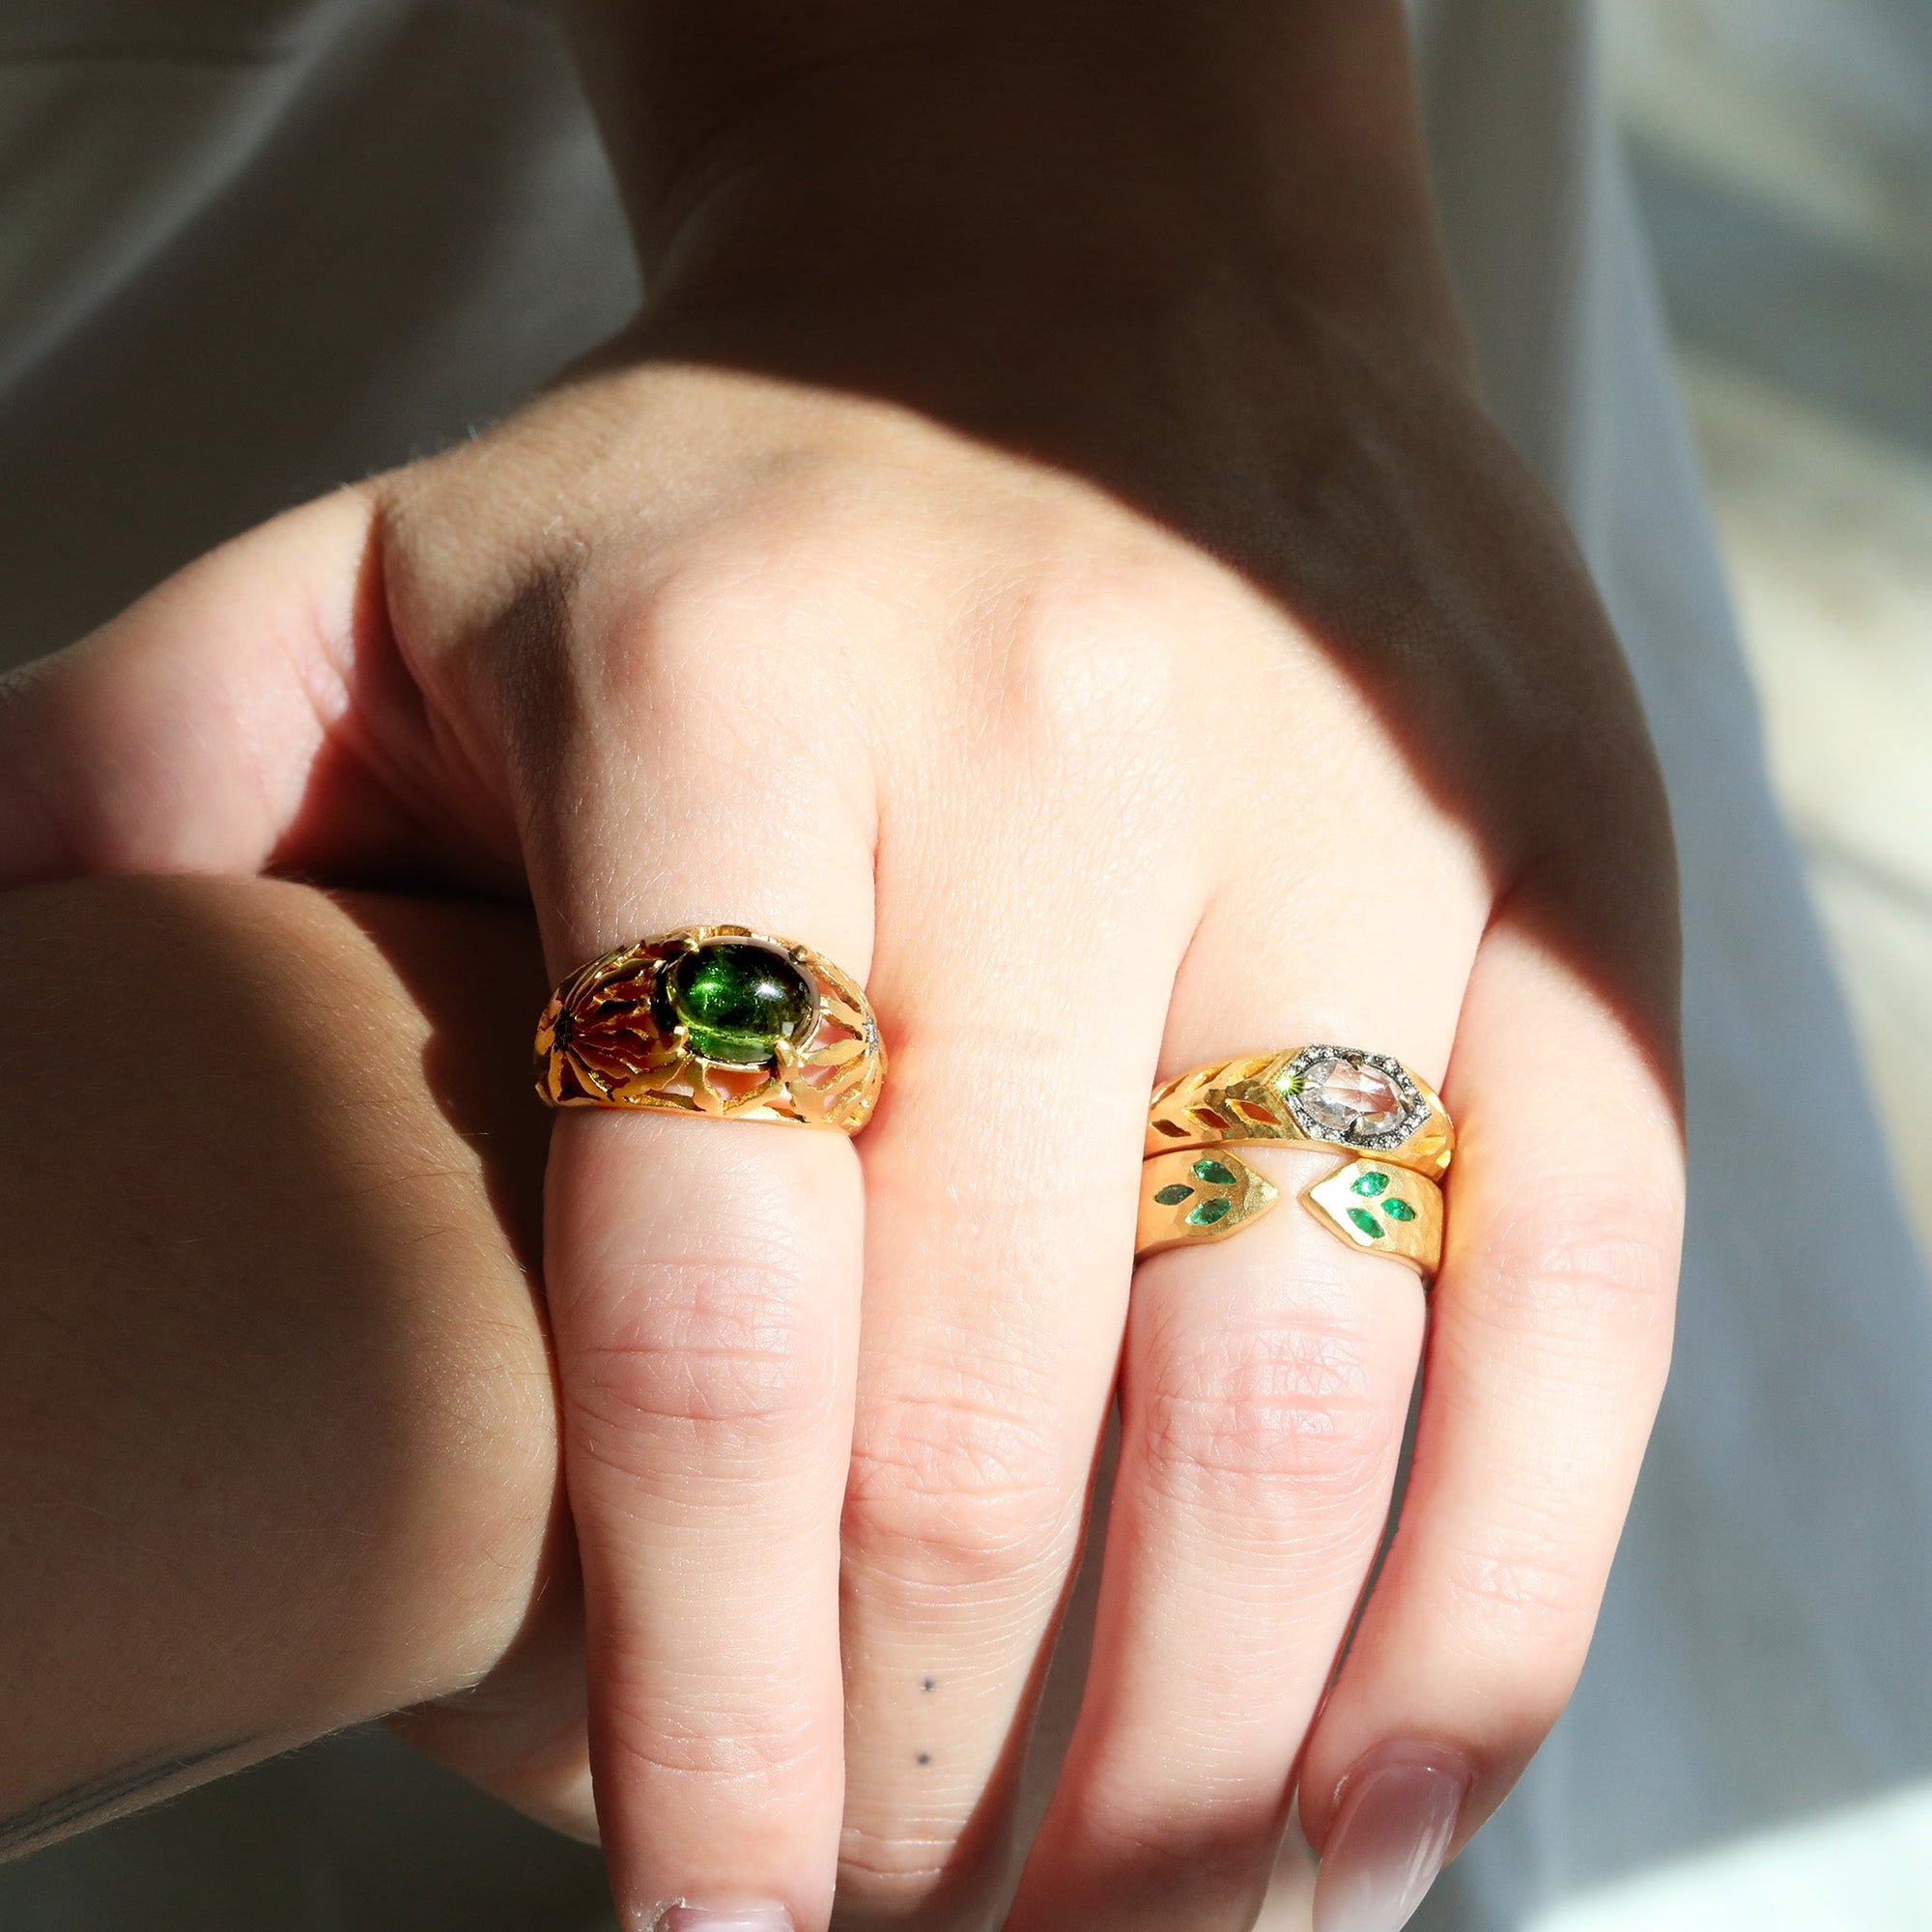 22K Gold Hammered Open Ring with Marquise Emerald "Leaf" Details - Peridot Fine Jewelry - Cathy Waterman